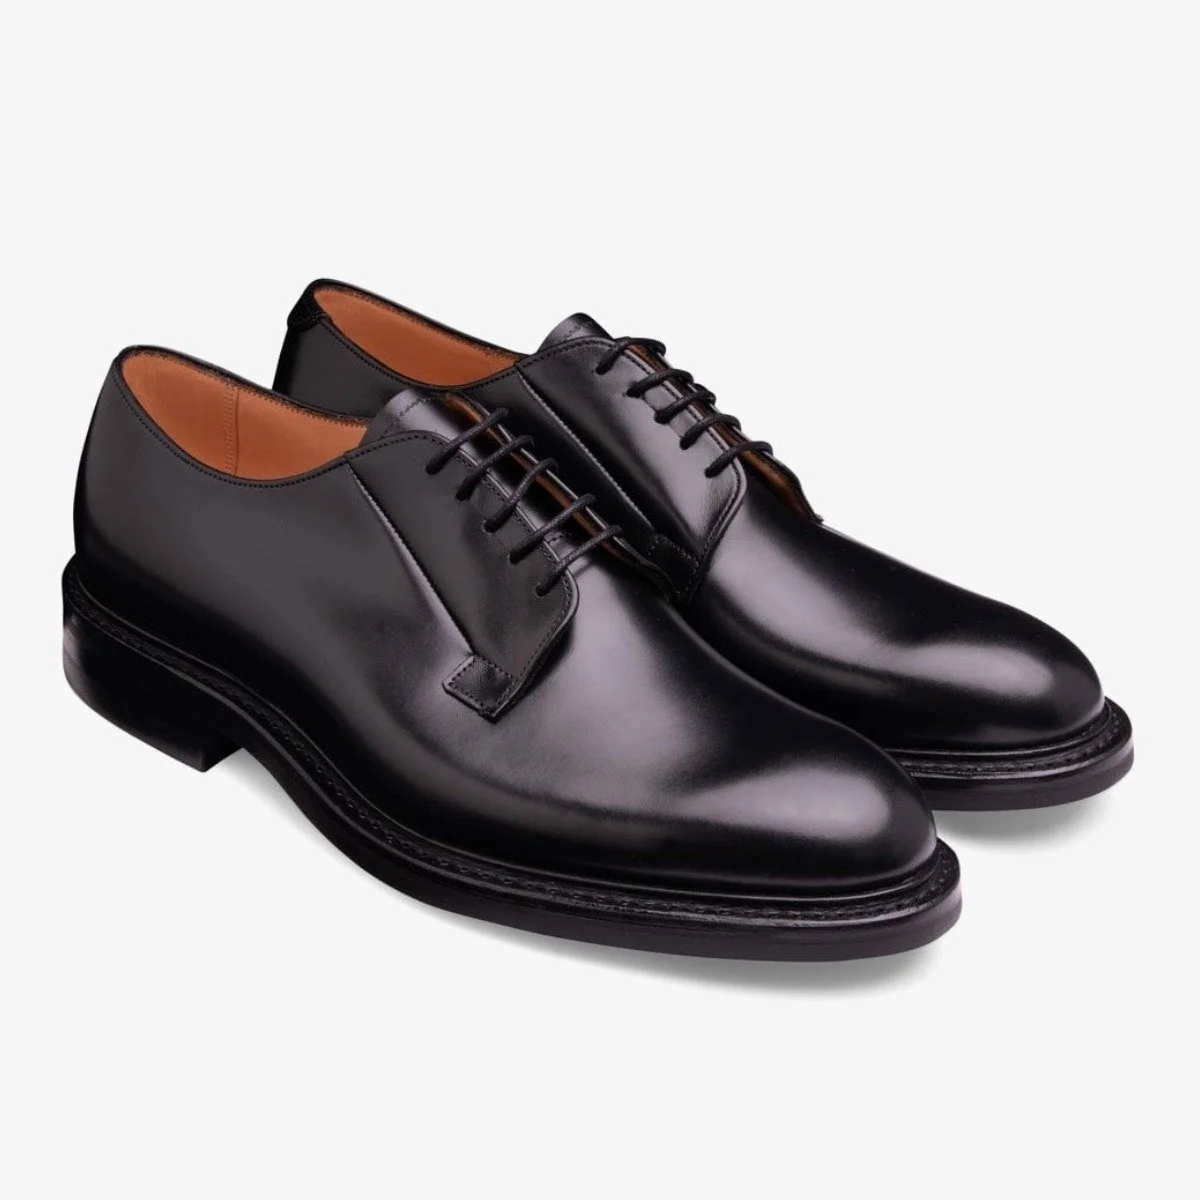 Cheaney Deal II black blucher shoes